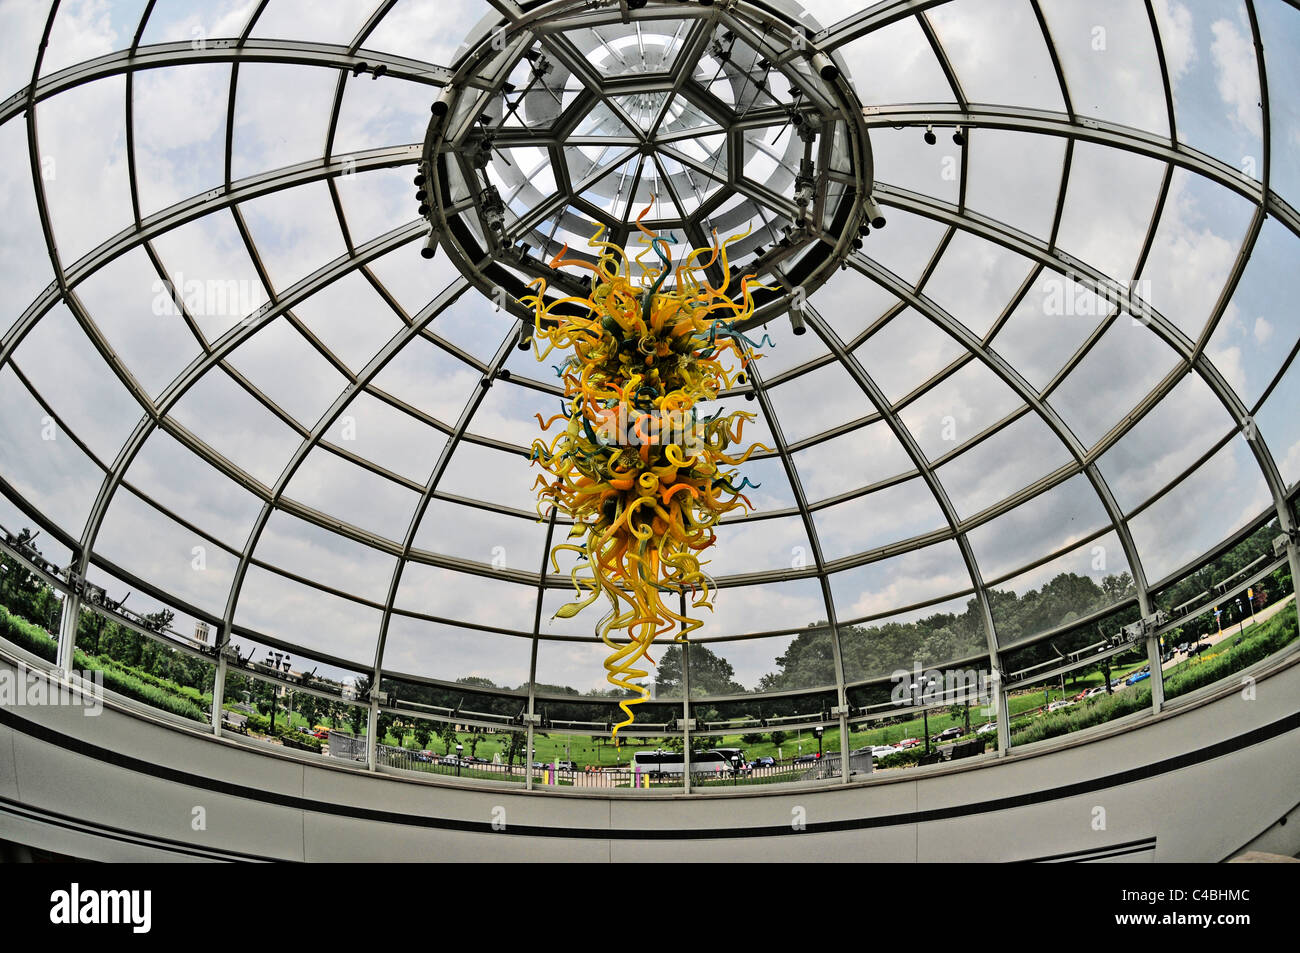 Sculpture en verre par Dale Chihuly hanging in Phipps Conservatory, Pittsburgh, Pennsylvanie, USA Banque D'Images